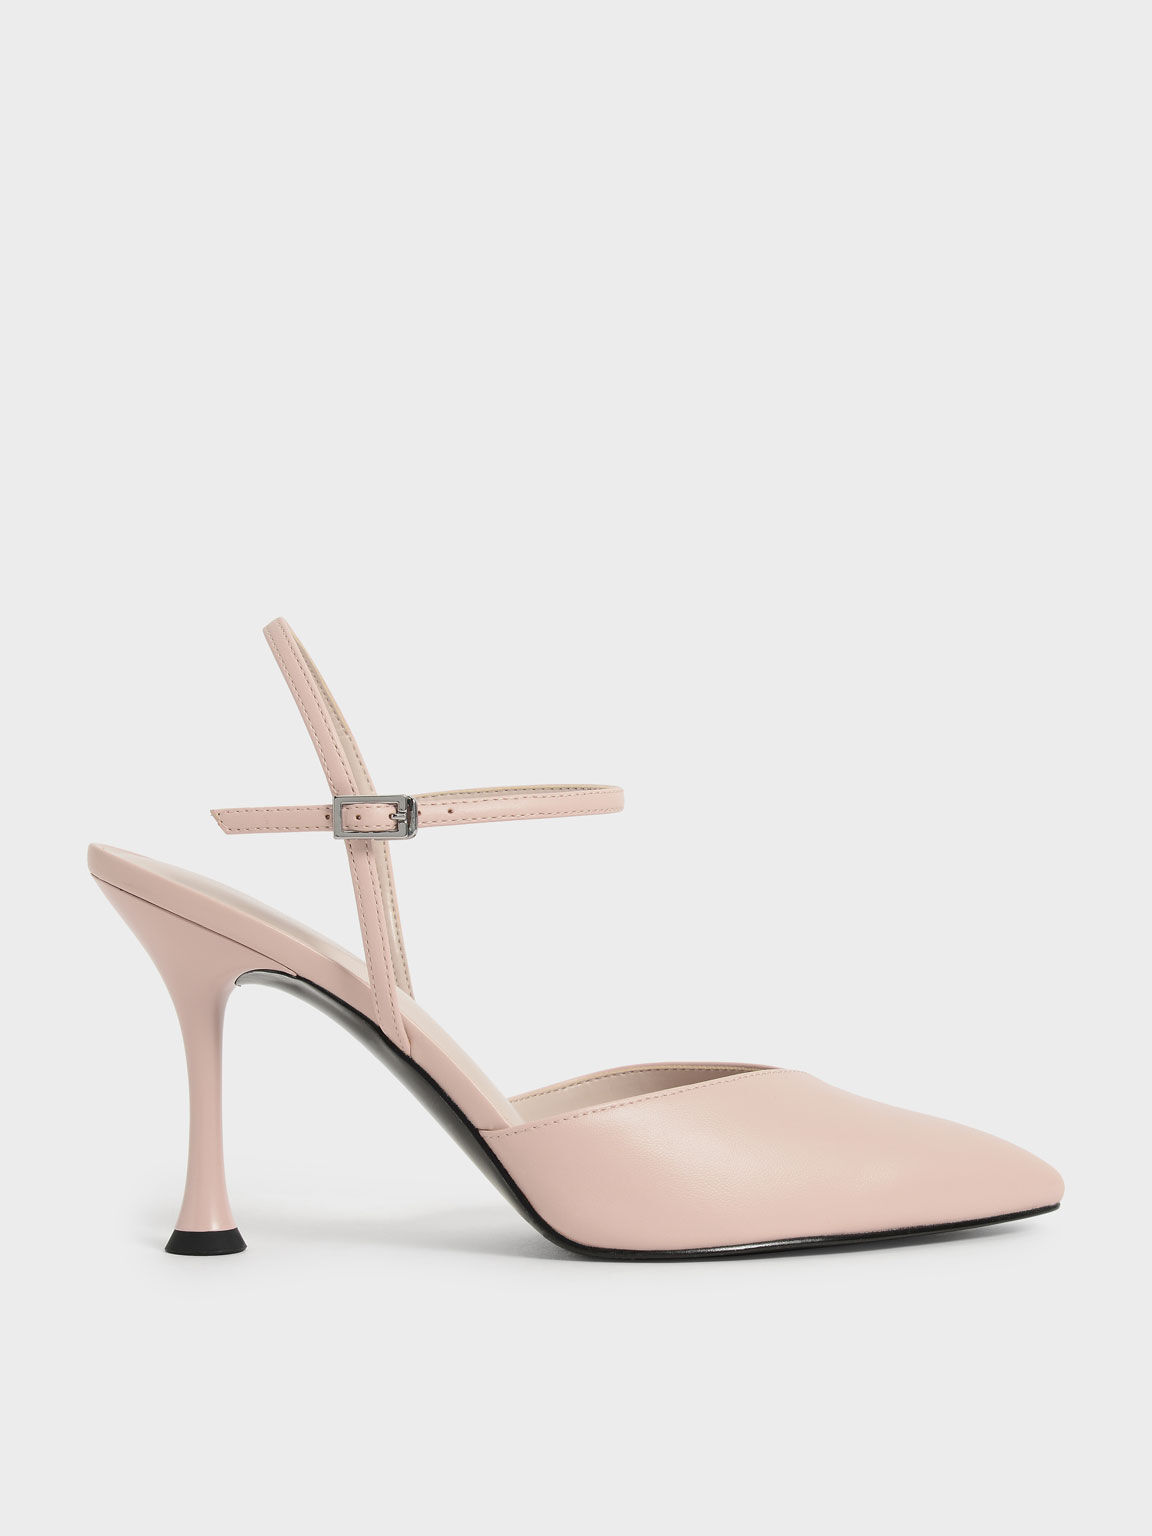 Charles & Keith Women's Pointed-Toe Stiletto Heel Ankle